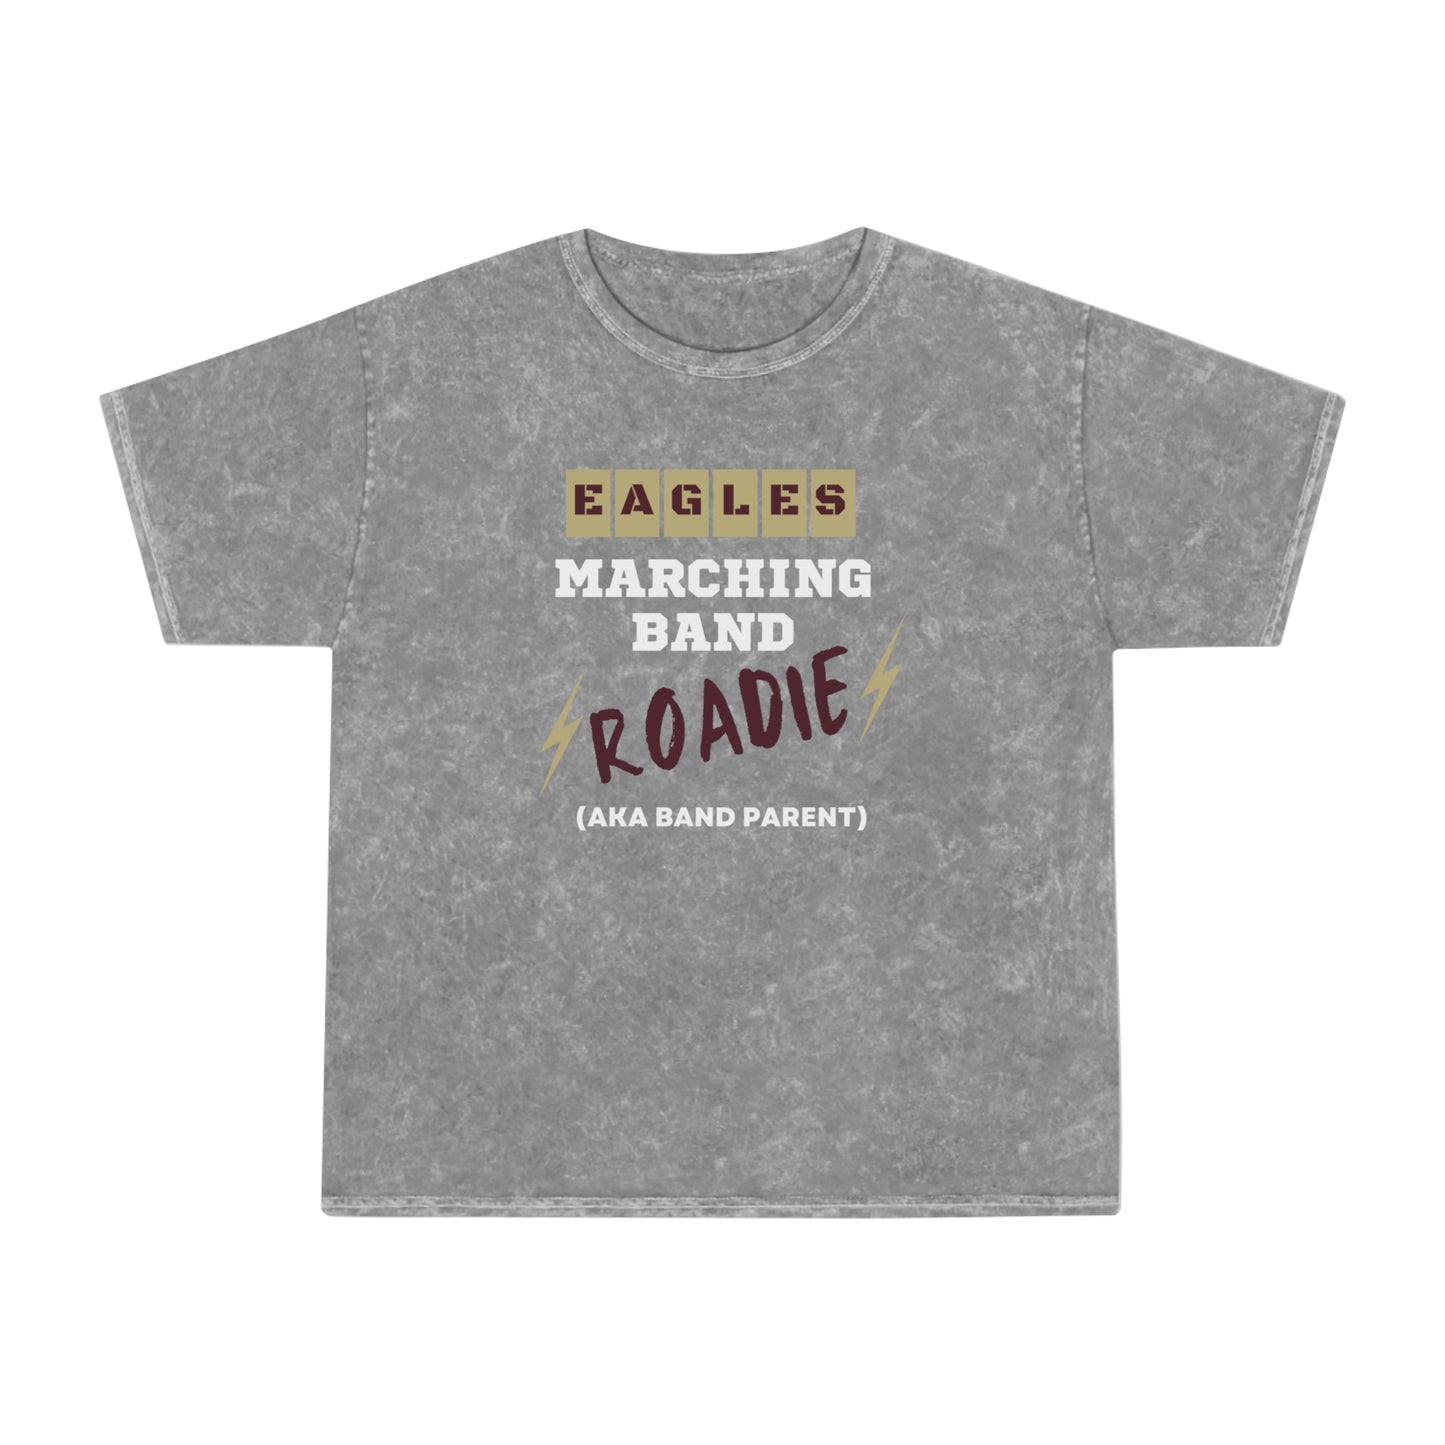 Unisex Parent Roadie Mineral Wash Short Sleeve Graphic Tee - New Albany Eagles